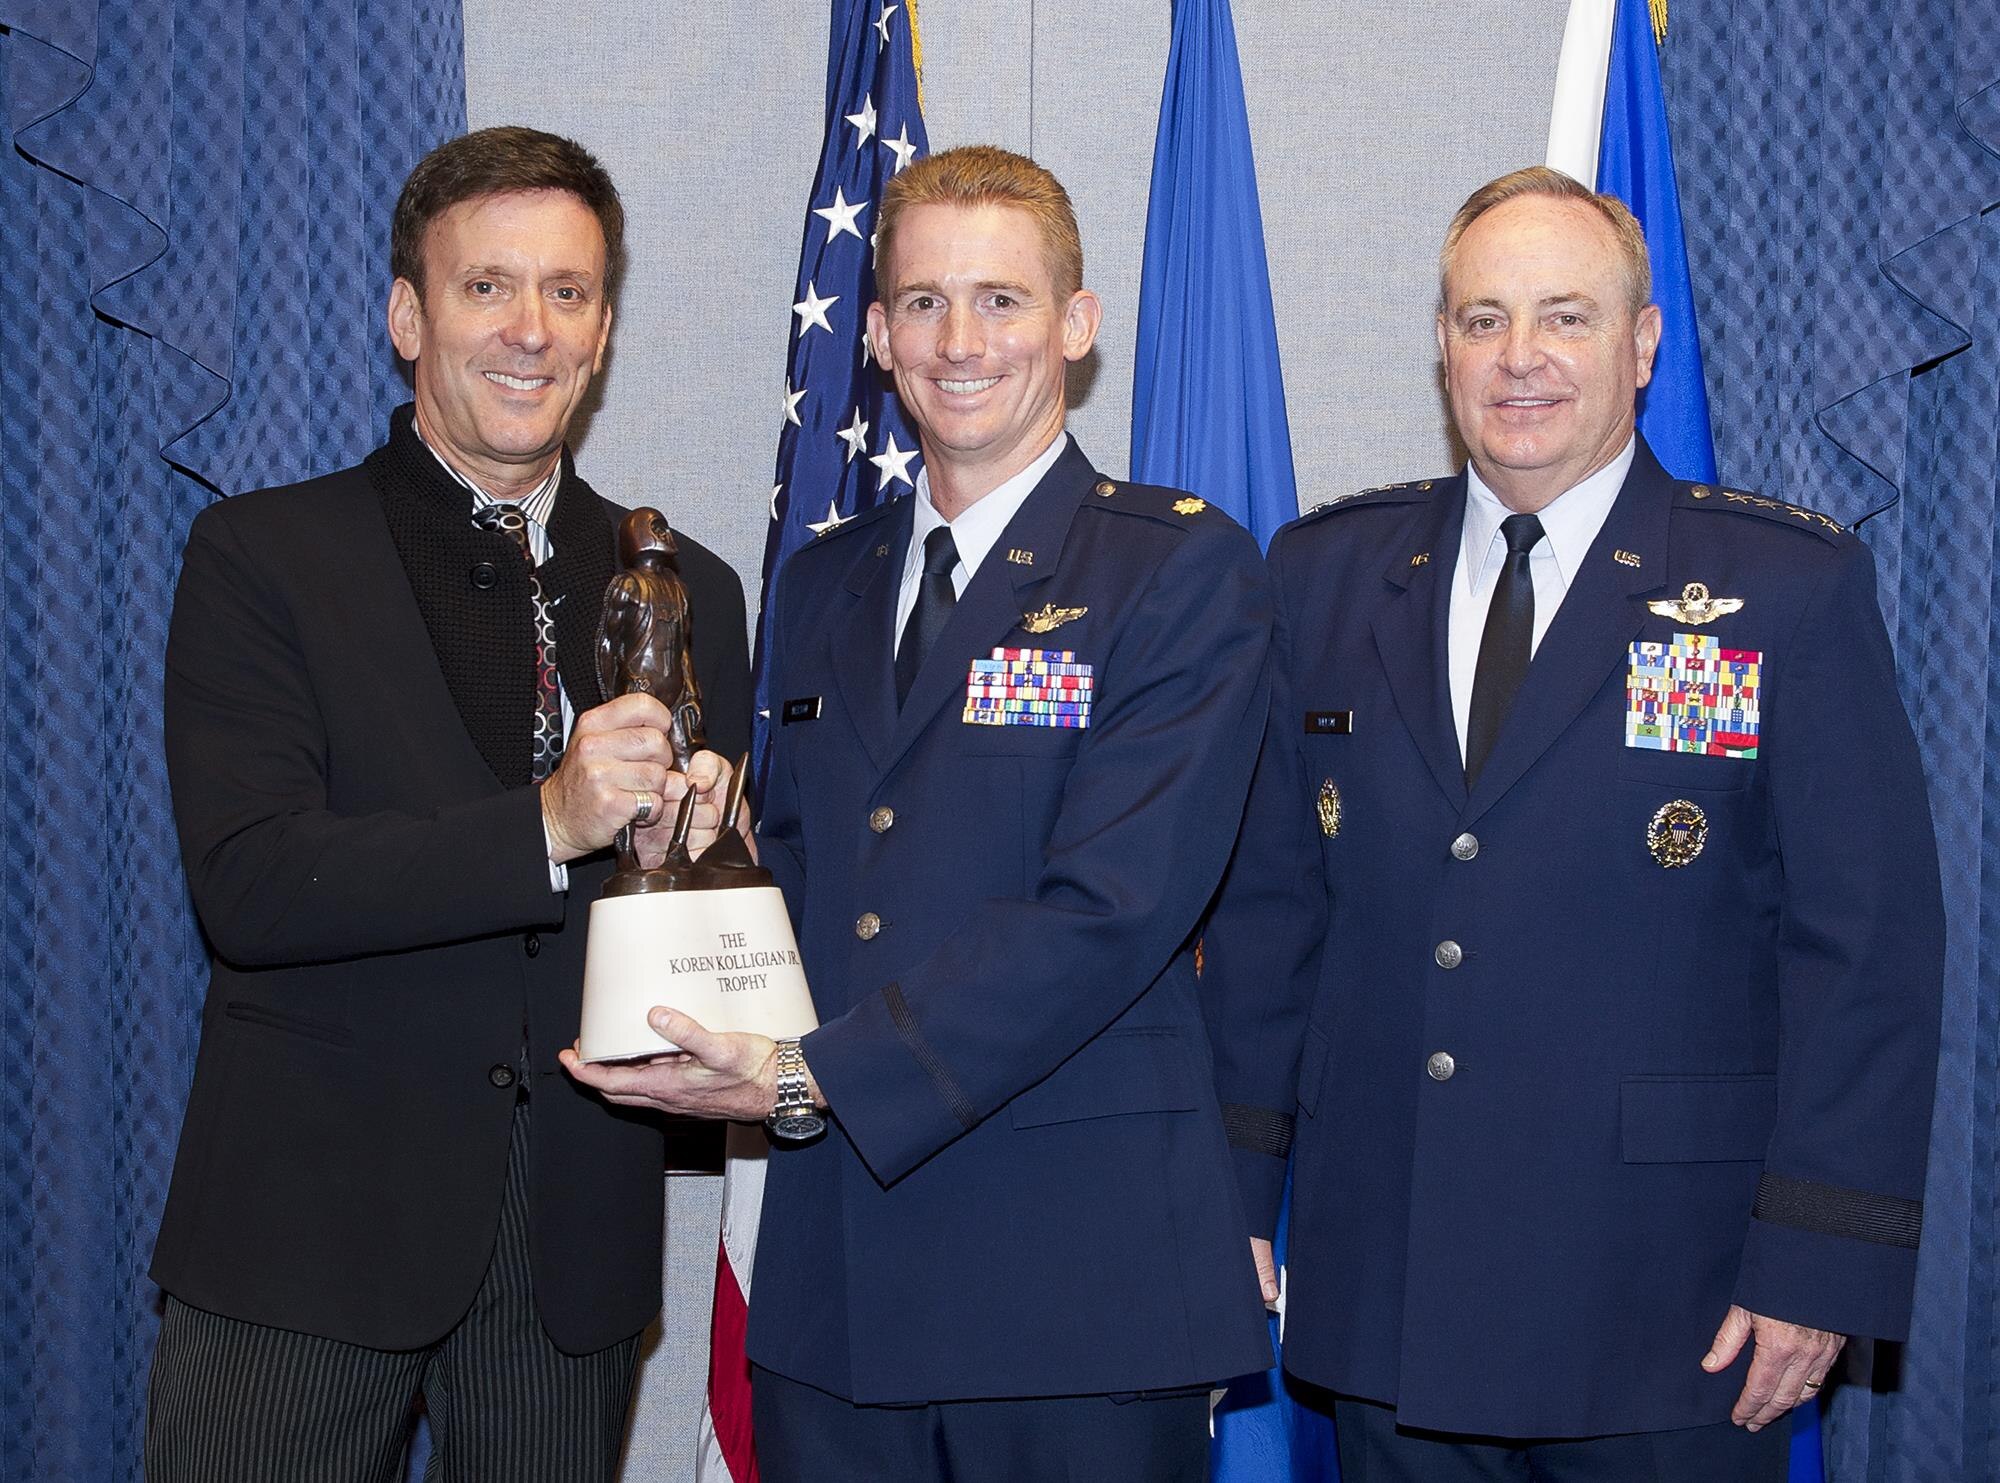 Kolligian family representative Corey Kolligian and Air Force Chief of Staff Gen. Mark A. Welsh III congratulate Maj. Jack Nelson during a ceremony at the Pentagon in Washington, D.C., May 25, 2016.  Nelson, from the 9th Reconnaissance Wing at Osan Air Base, South Korea, is the recipient of the 2015 Koren Kolligian Jr. Trophy for outstanding airmanship by an aircrew member who, by using extraordinary skills, averted or minimized the seriousness of an aircraft accident. (U.S. Air Force photo/Andy Morataya)